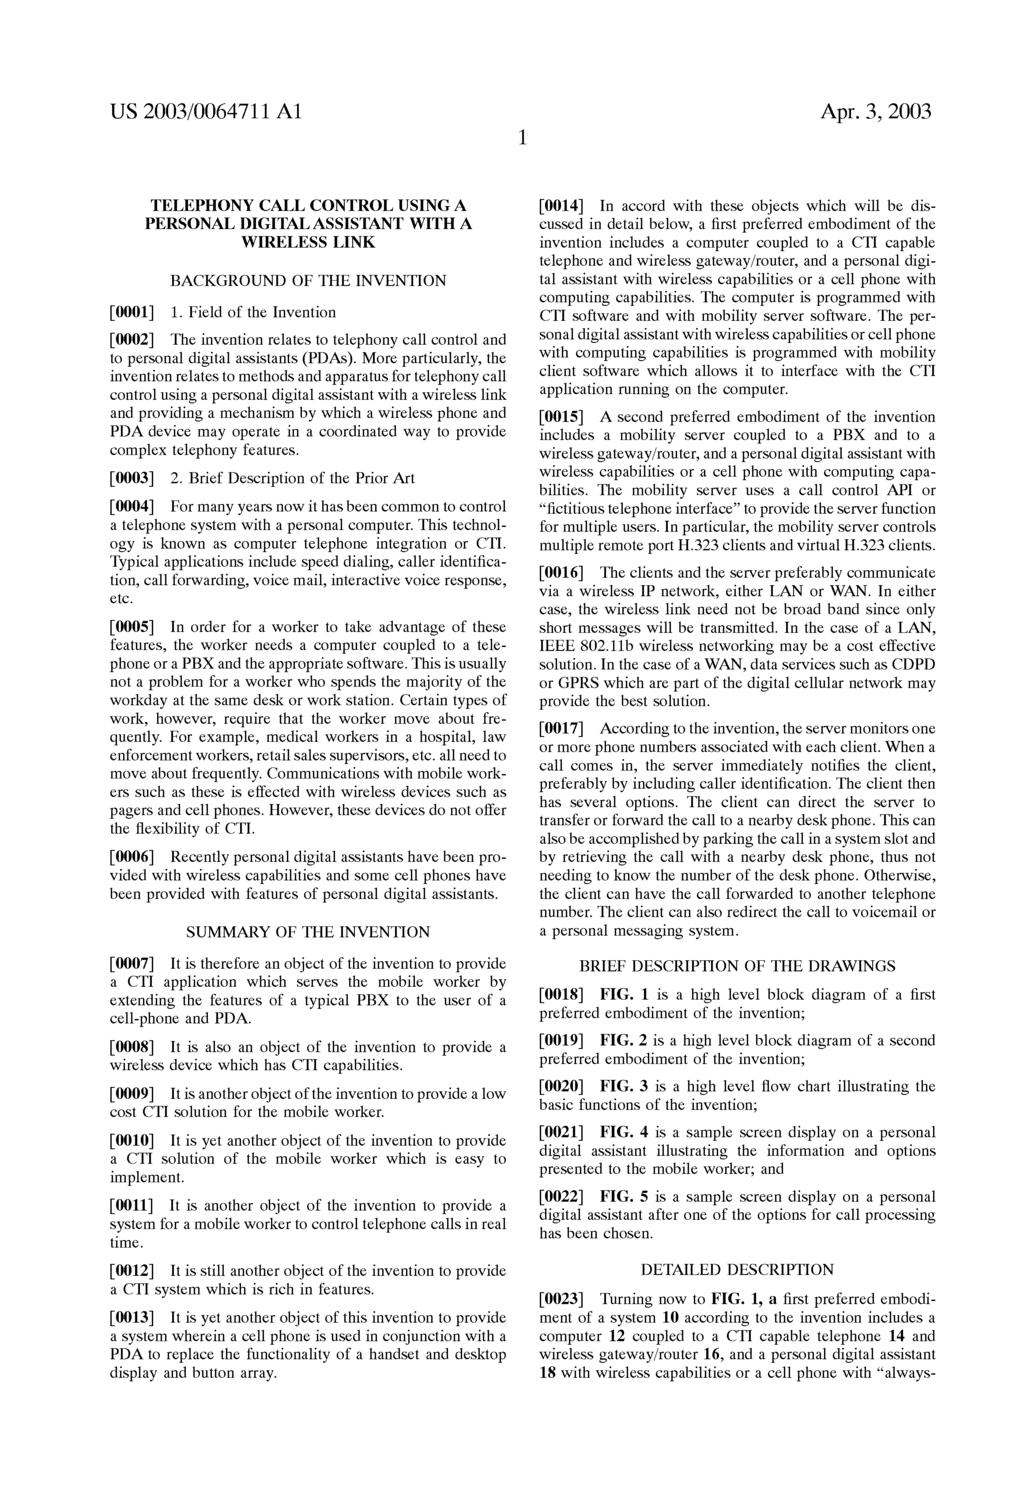 US 2003/OO64711 A1 Apr. 3, 2003 TELEPHONY CALL CONTROL USINGA PERSONAL DIGITAL ASSISTANT WITH A WIRELESS LINK BACKGROUND OF THE INVENTION 0001) 1.